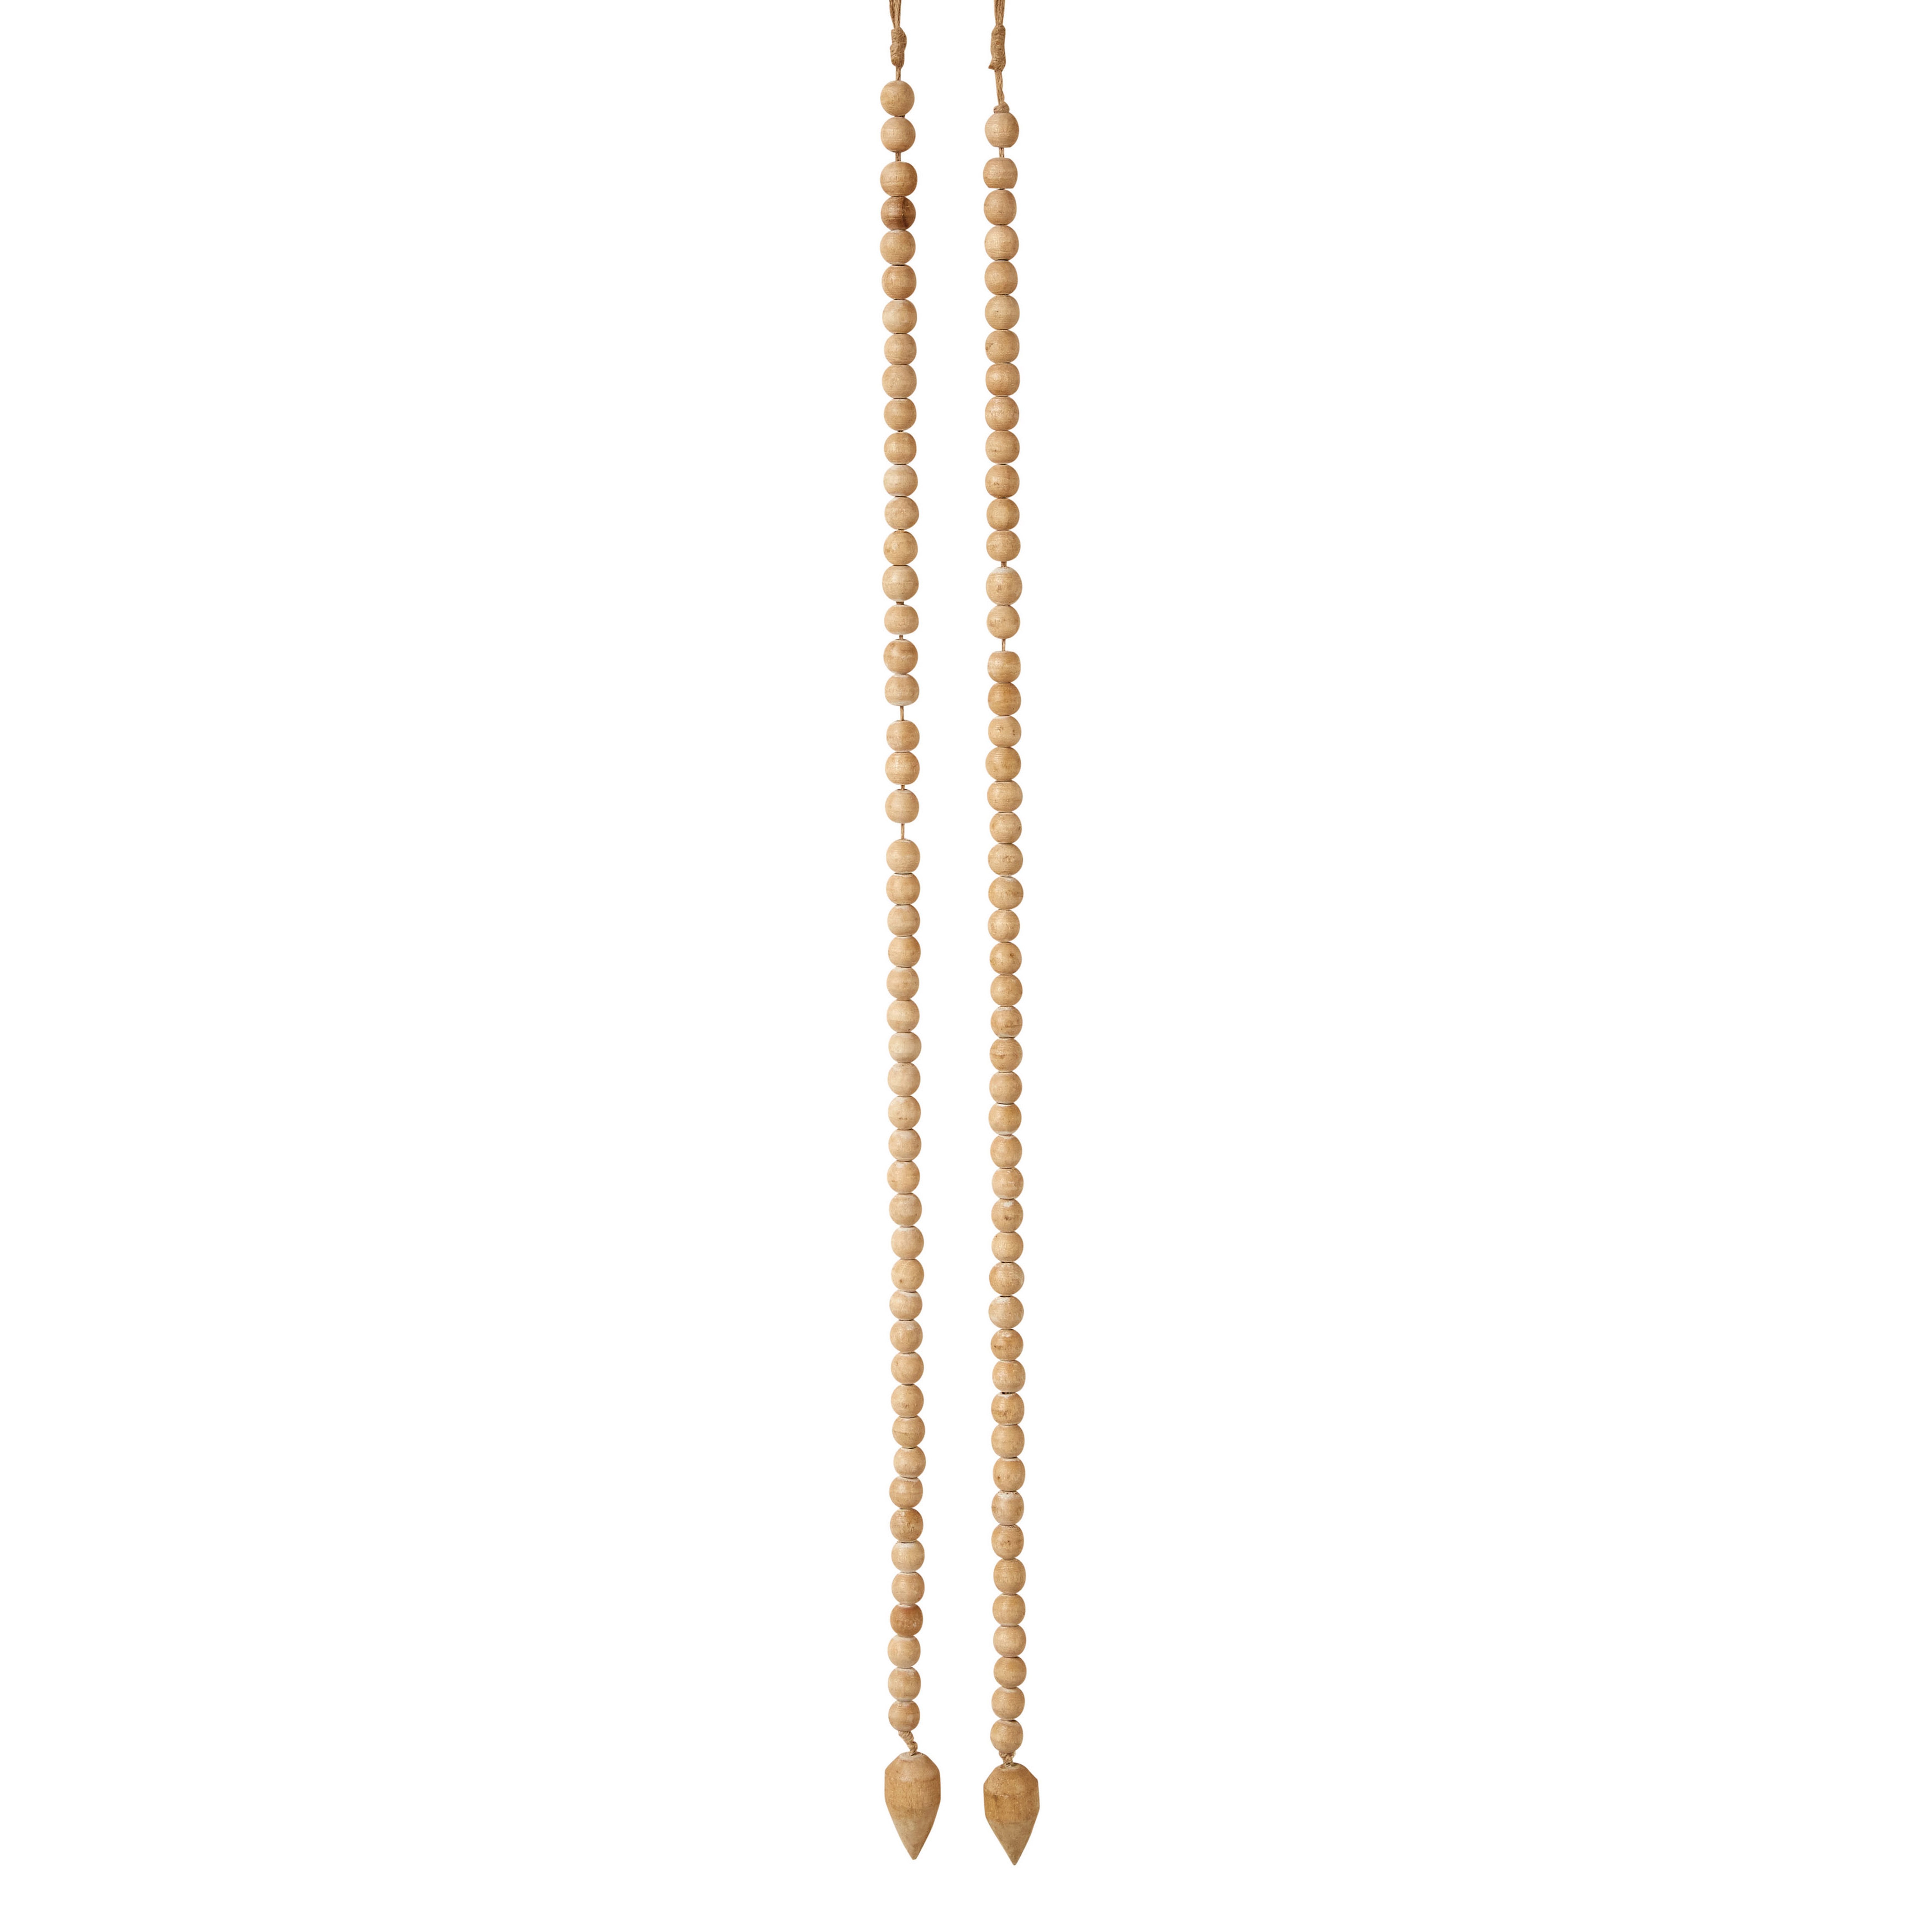 Wood Bead Strand with Decorative Wood Bead Drop - Nomad Home